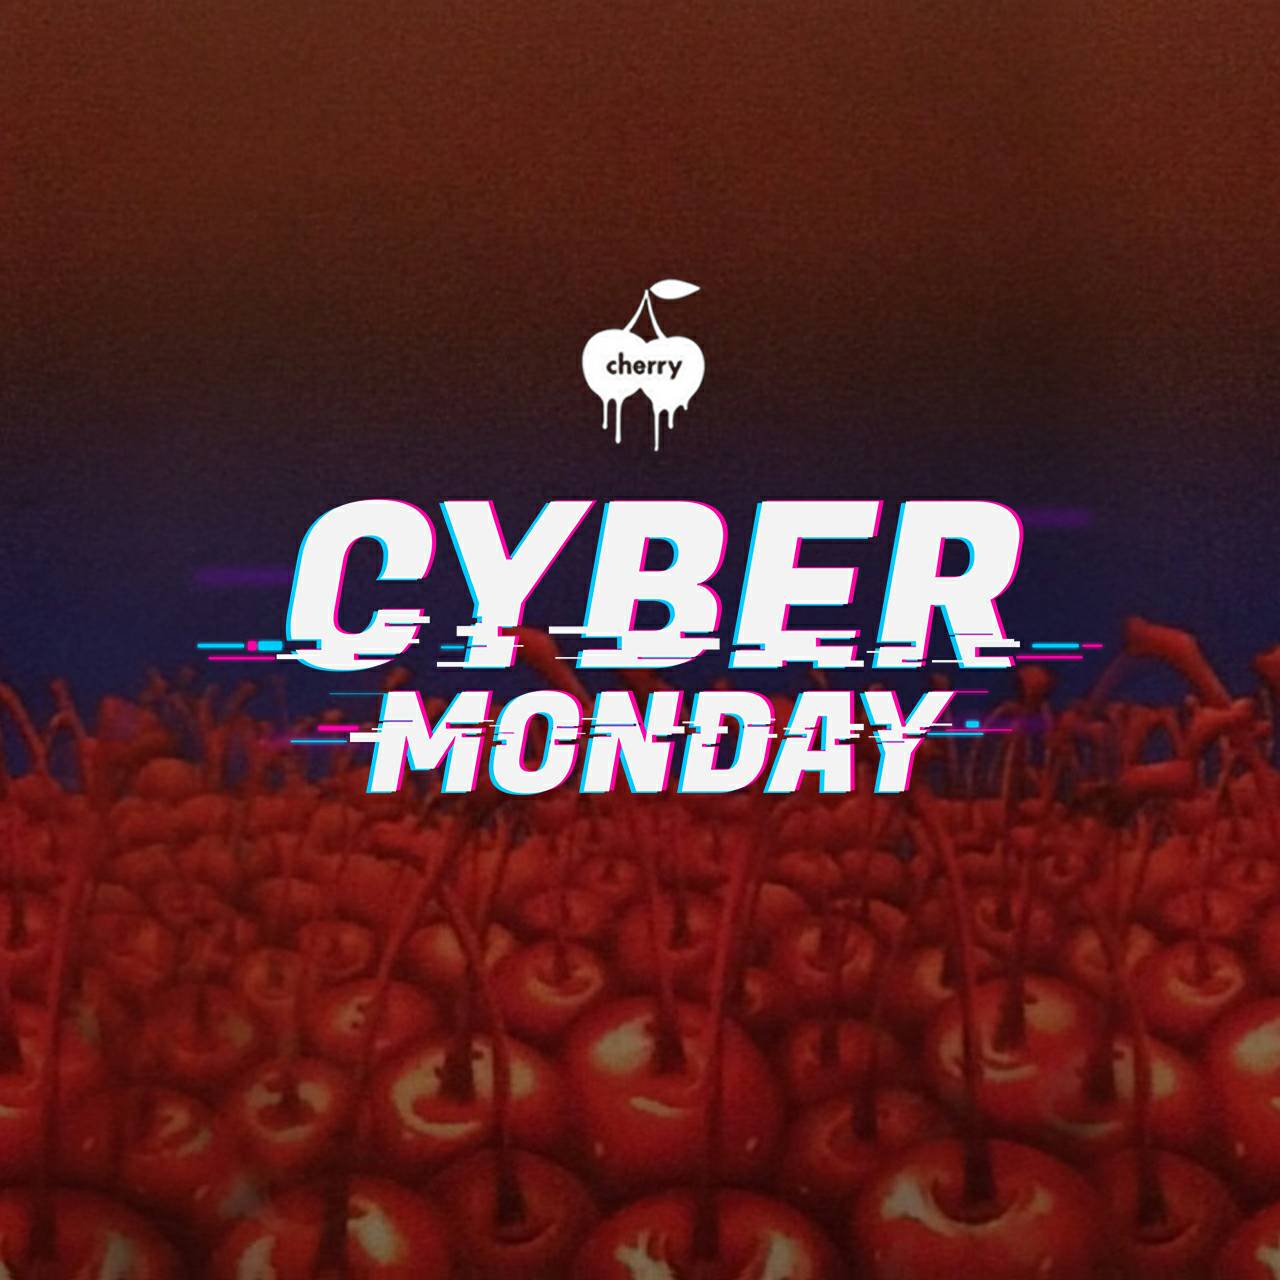 【CYBER MONDAY】<br> Held from 20:00 on Monday, November 28th!<br> 30% OFF special coupon issuance start!